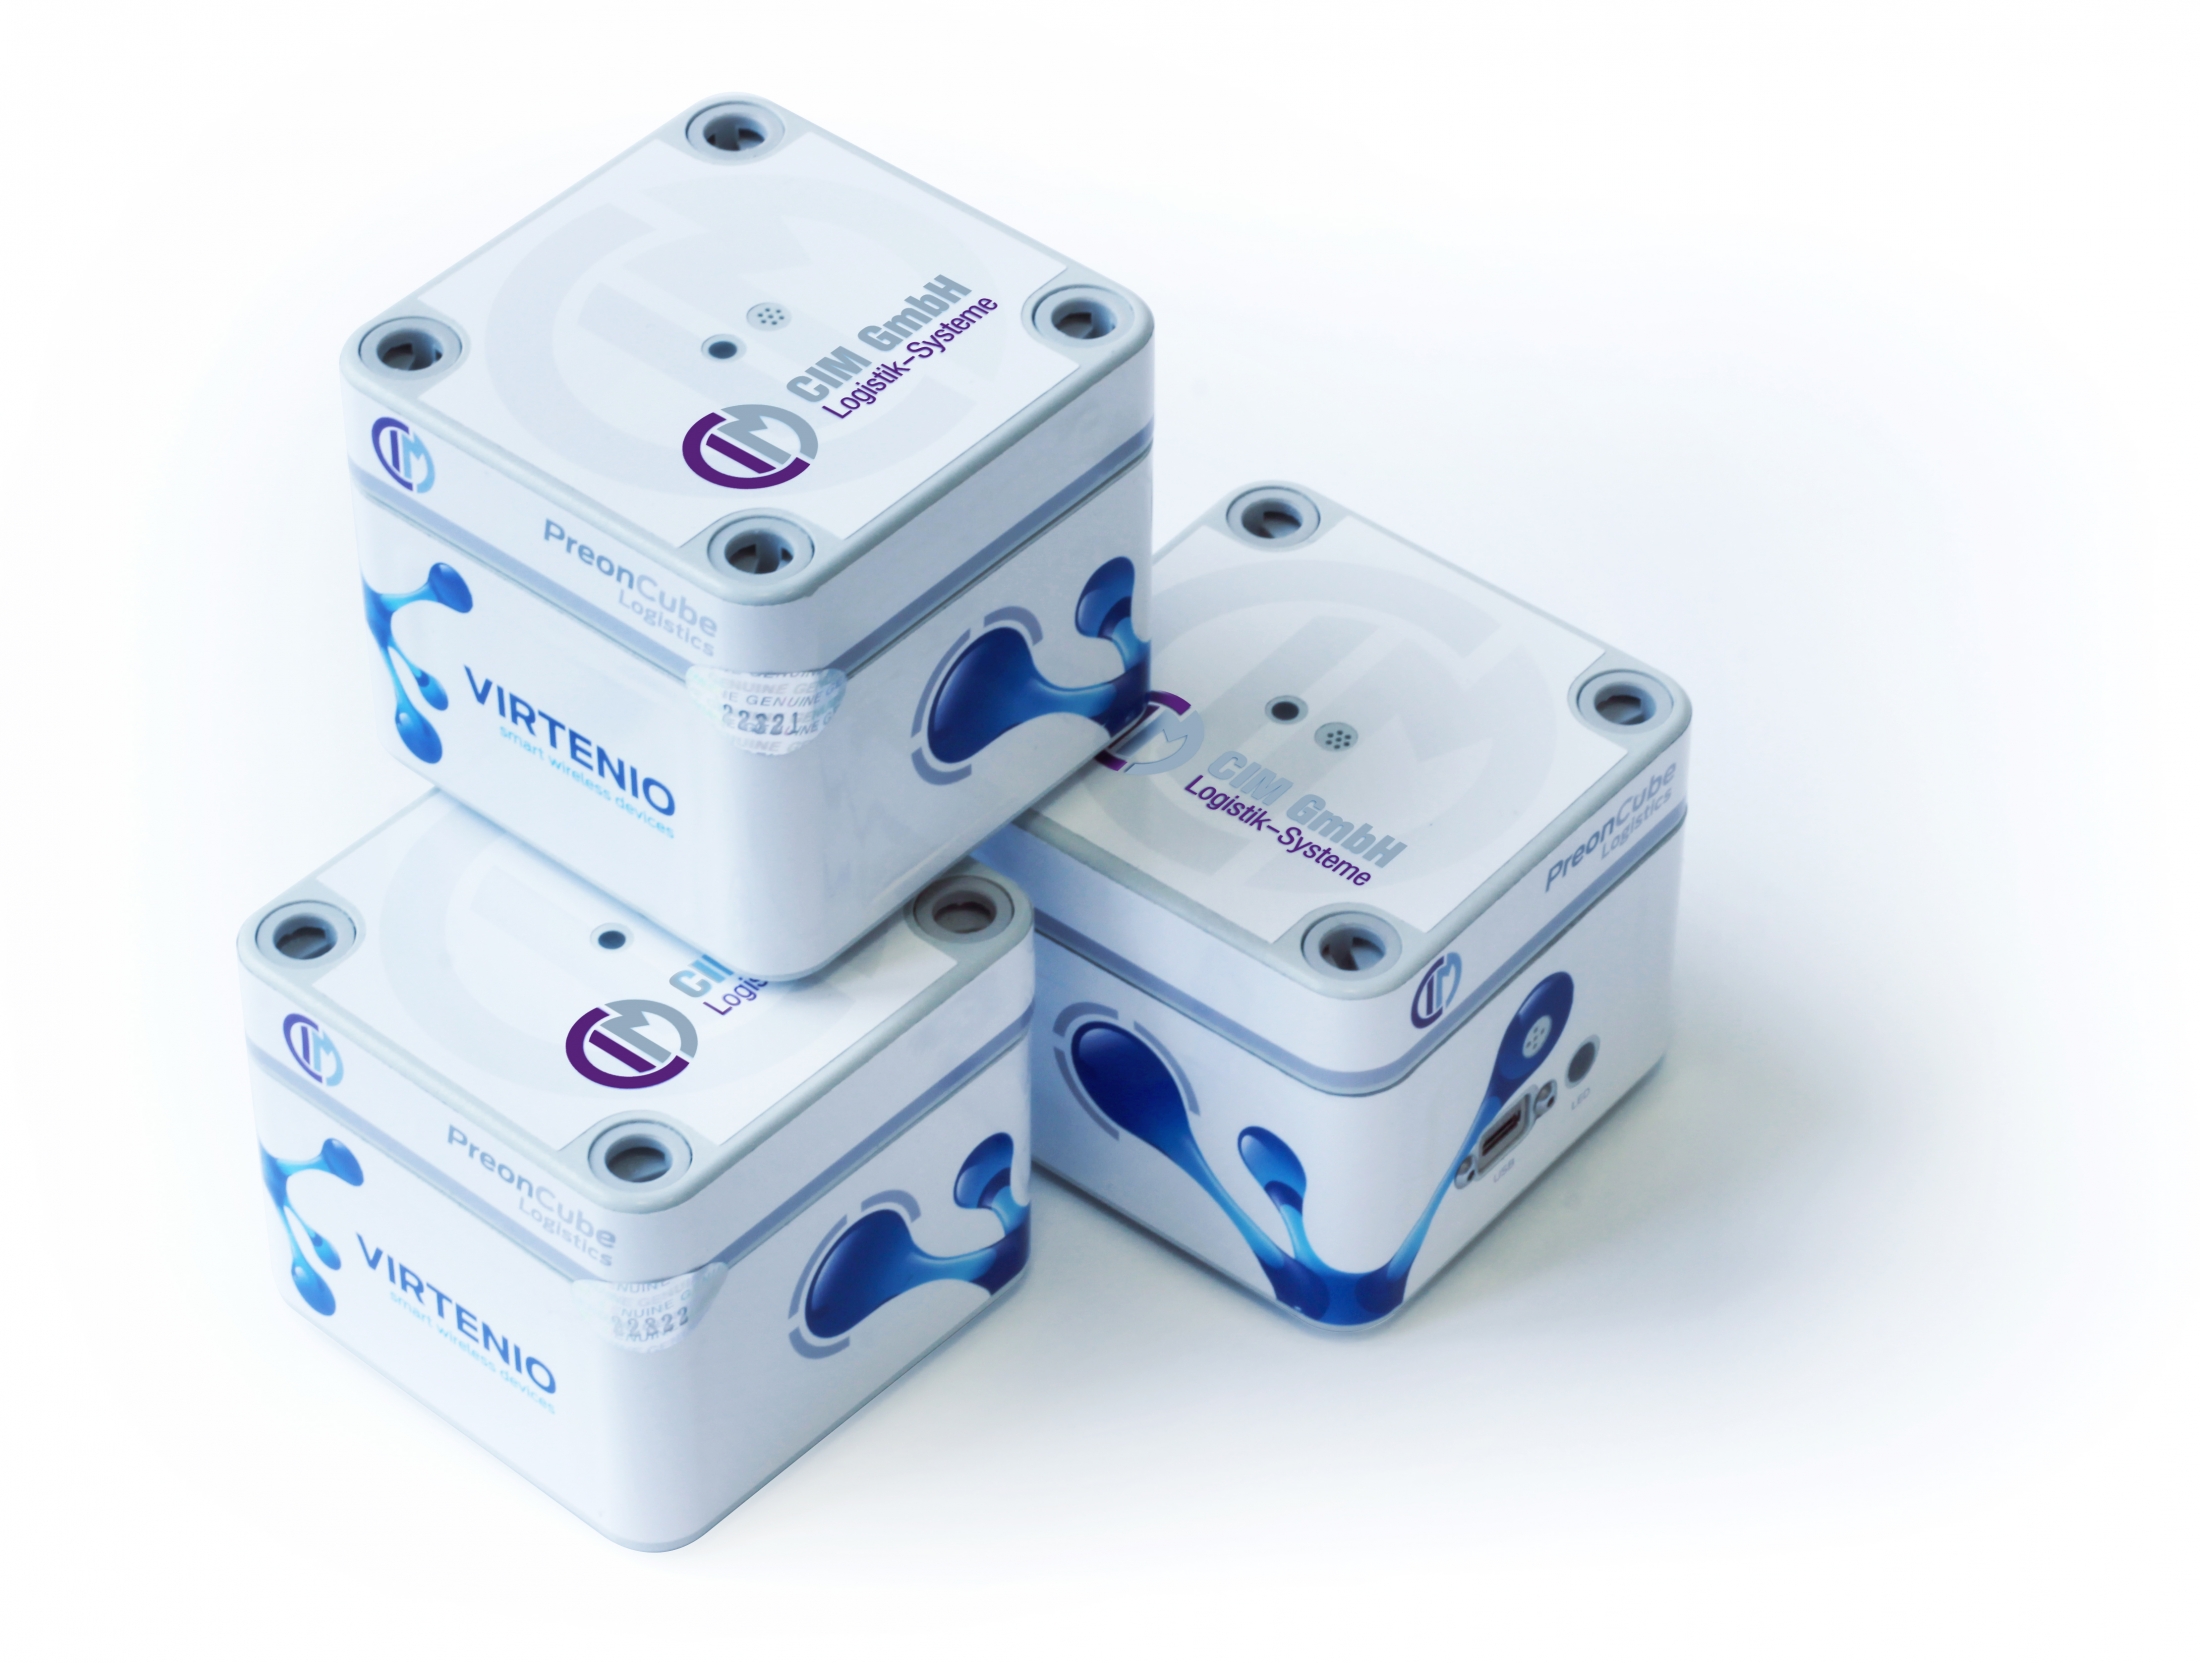 The sensor cubes used by CIM can measure temperature, humidity, acceleration, and so on